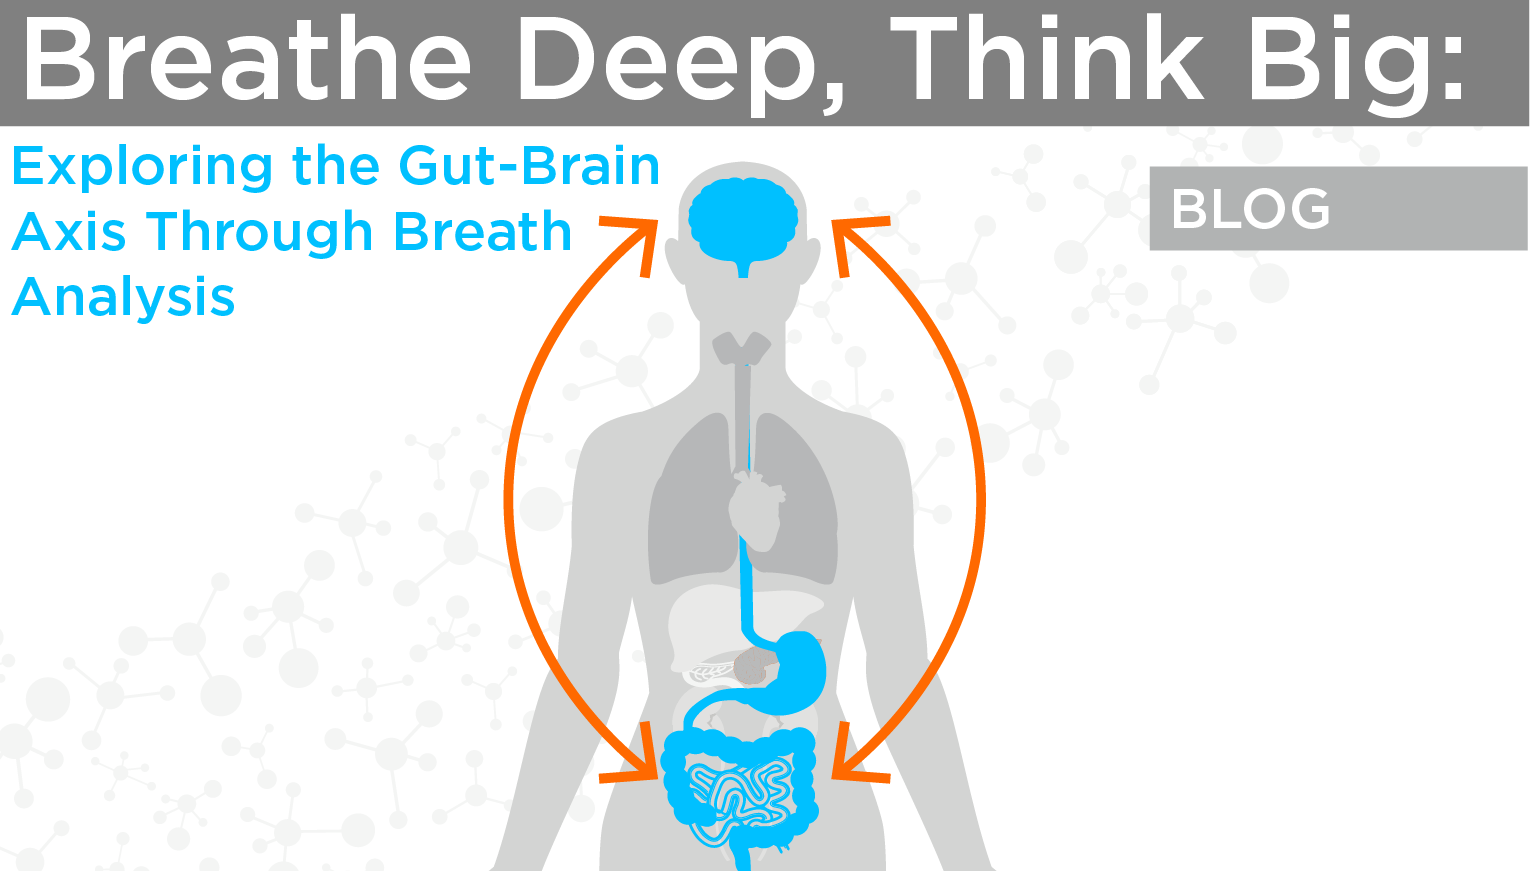 A blog on the gut-brain axis and breath analysis